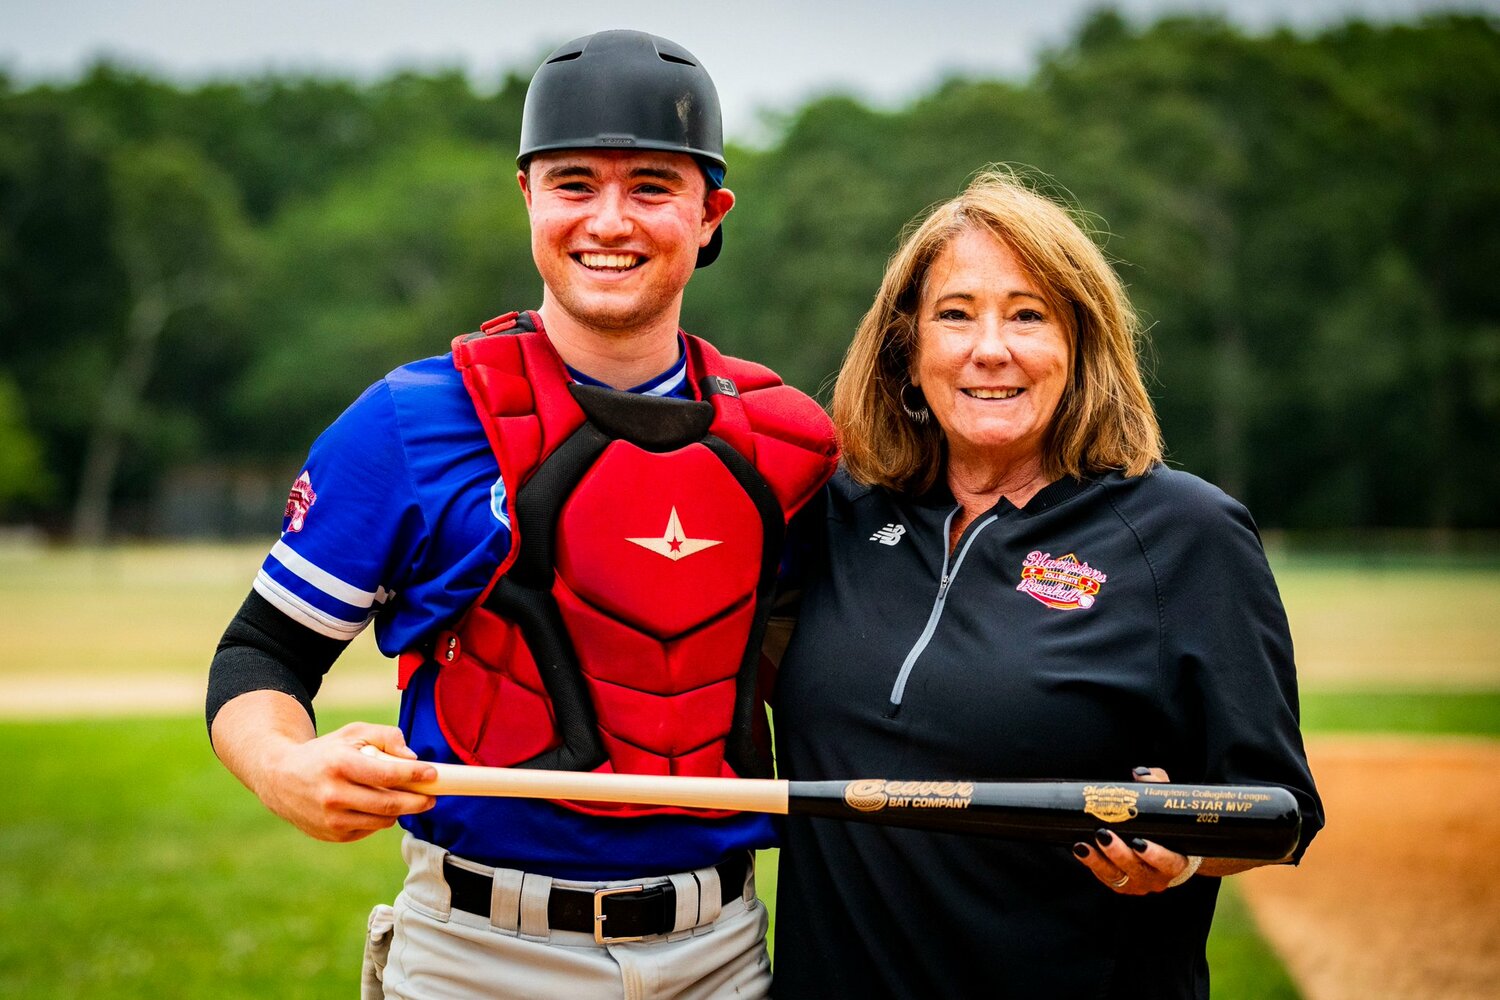 Southampton Breaker Ty Gilligan (Dominican) with HCBL President Sandi Kruel. Gilligan was selected as this year's HCBL All-Star Game MVP after hitting a game-tying two-run home run in the top of the ninth inning of Saturday's game.   DEMETRIUS KAZANAS